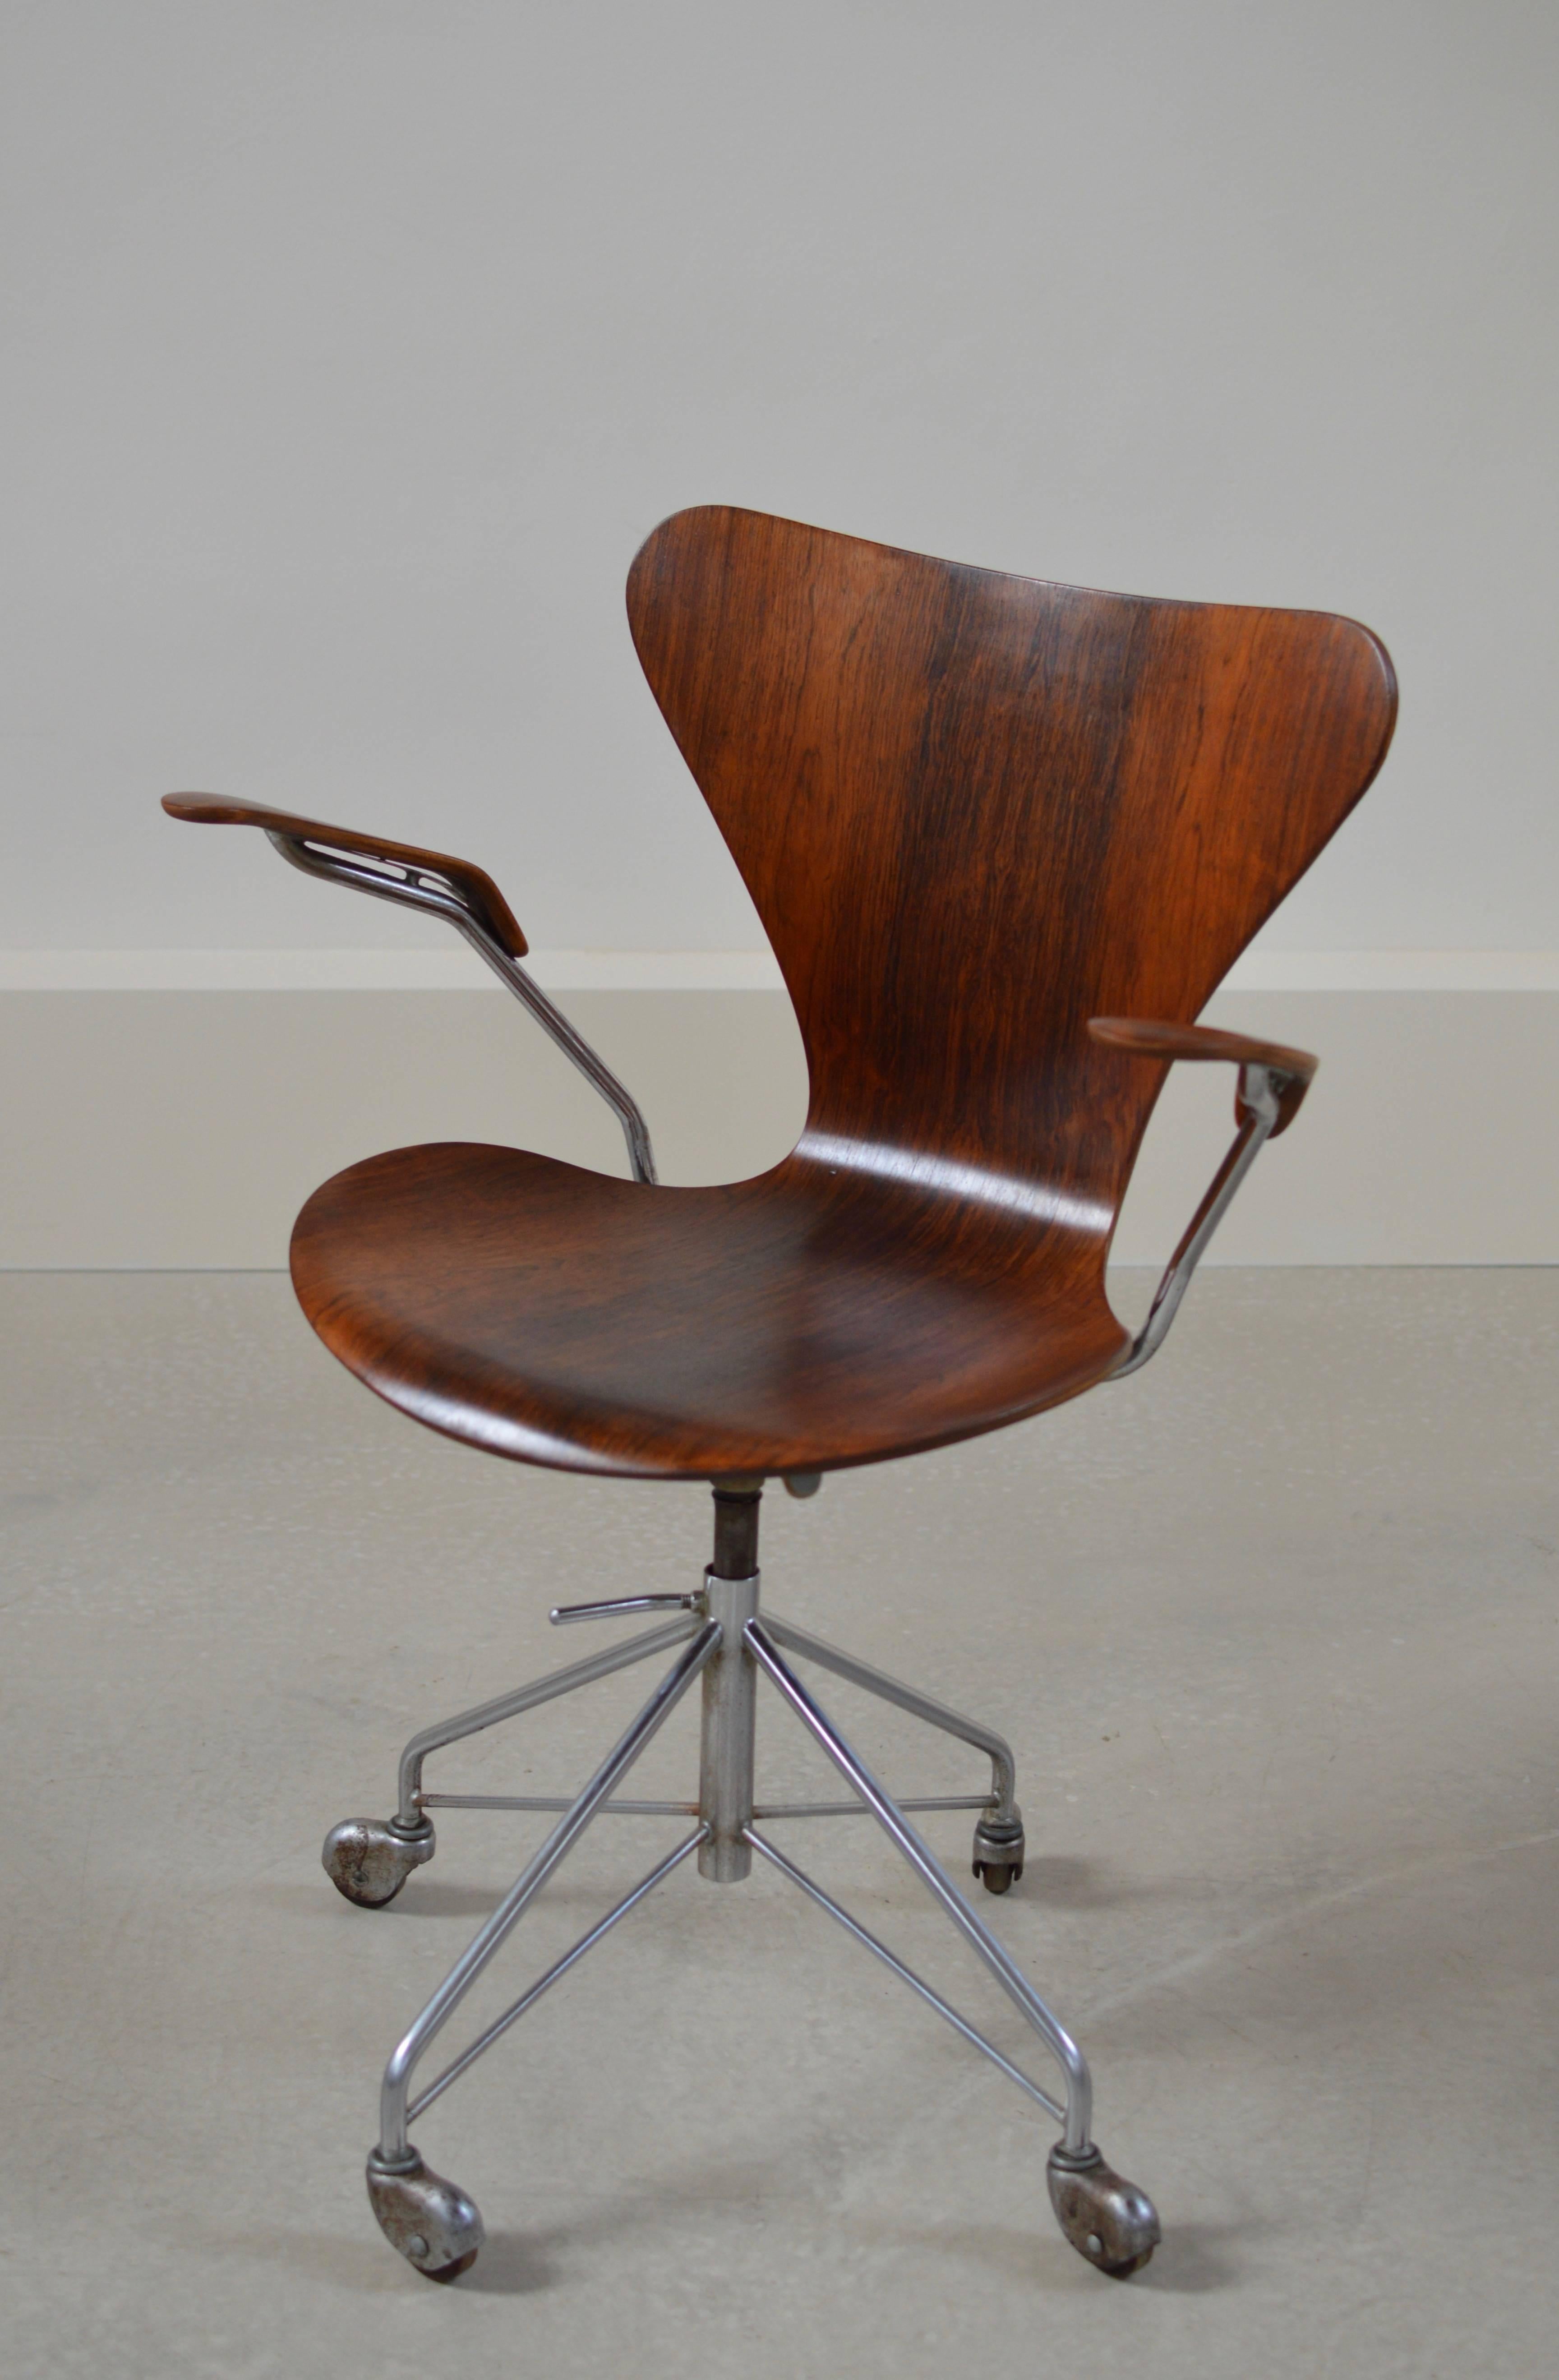 Rare rosewood edition swivel desk chair with armrests, model 3217 on four caster chromed swivel base. Originally designed in 1955, executed (as marked) by Fritz Hansen, Denmark. 
Chair is manually in height adjustable. Seat height when photographed